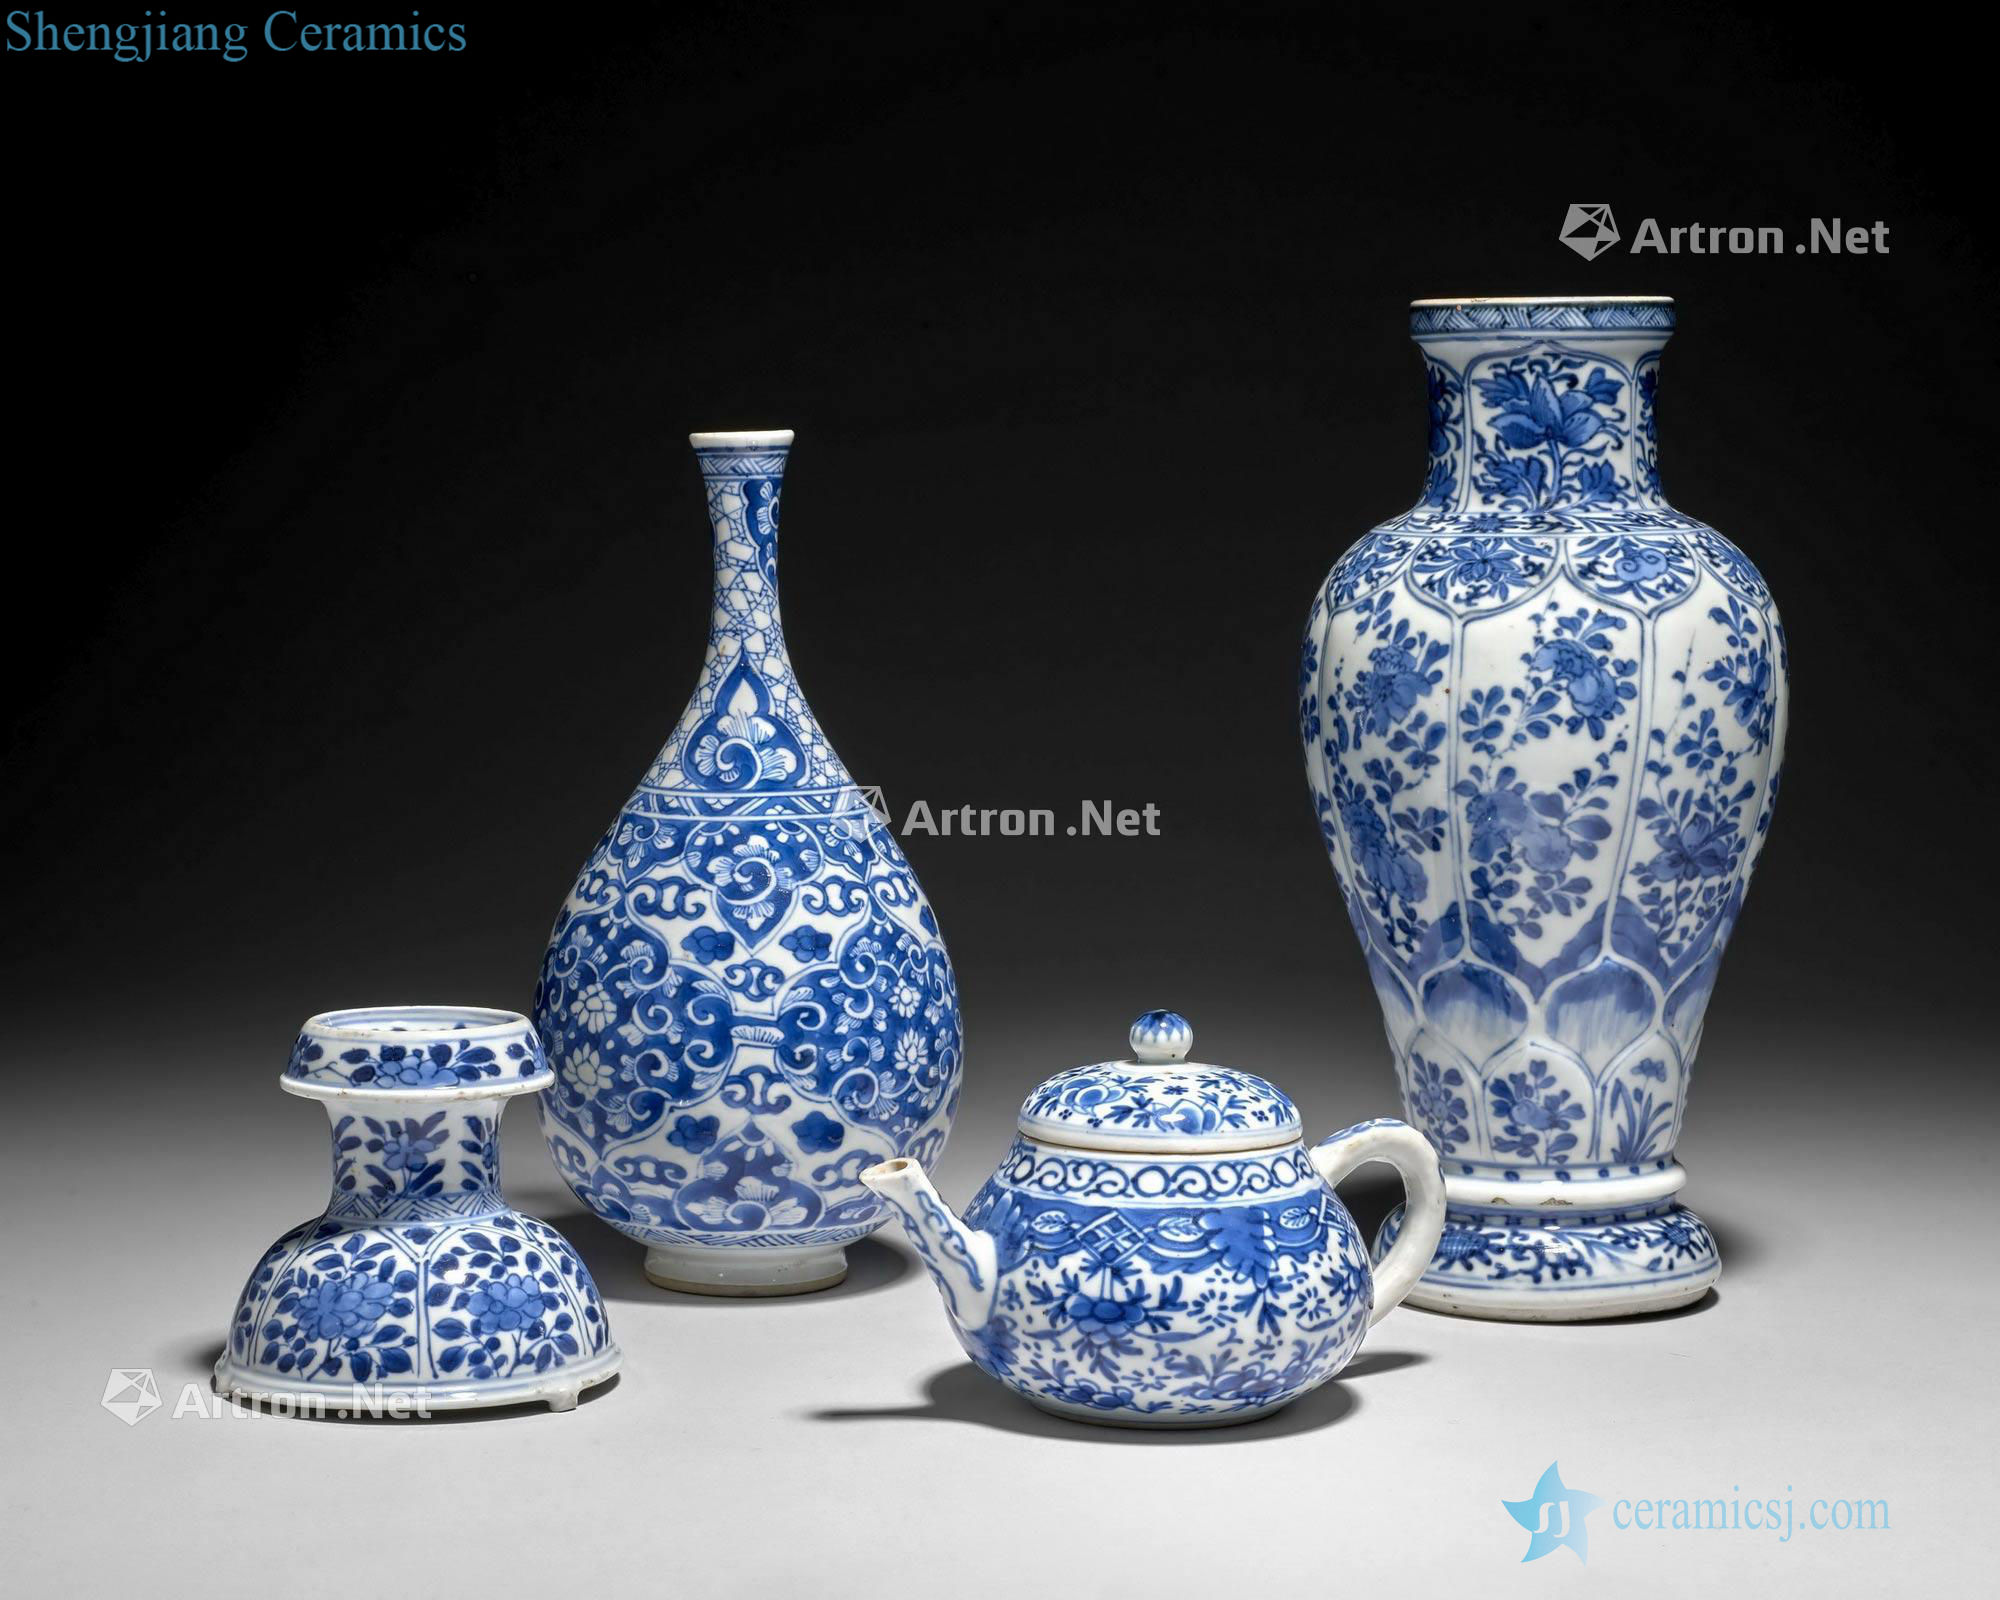 China, the Qing dynasty, Kangxi period (1662-1722), Two blue and white porcelain vases, tea - a pot and a salt cellar